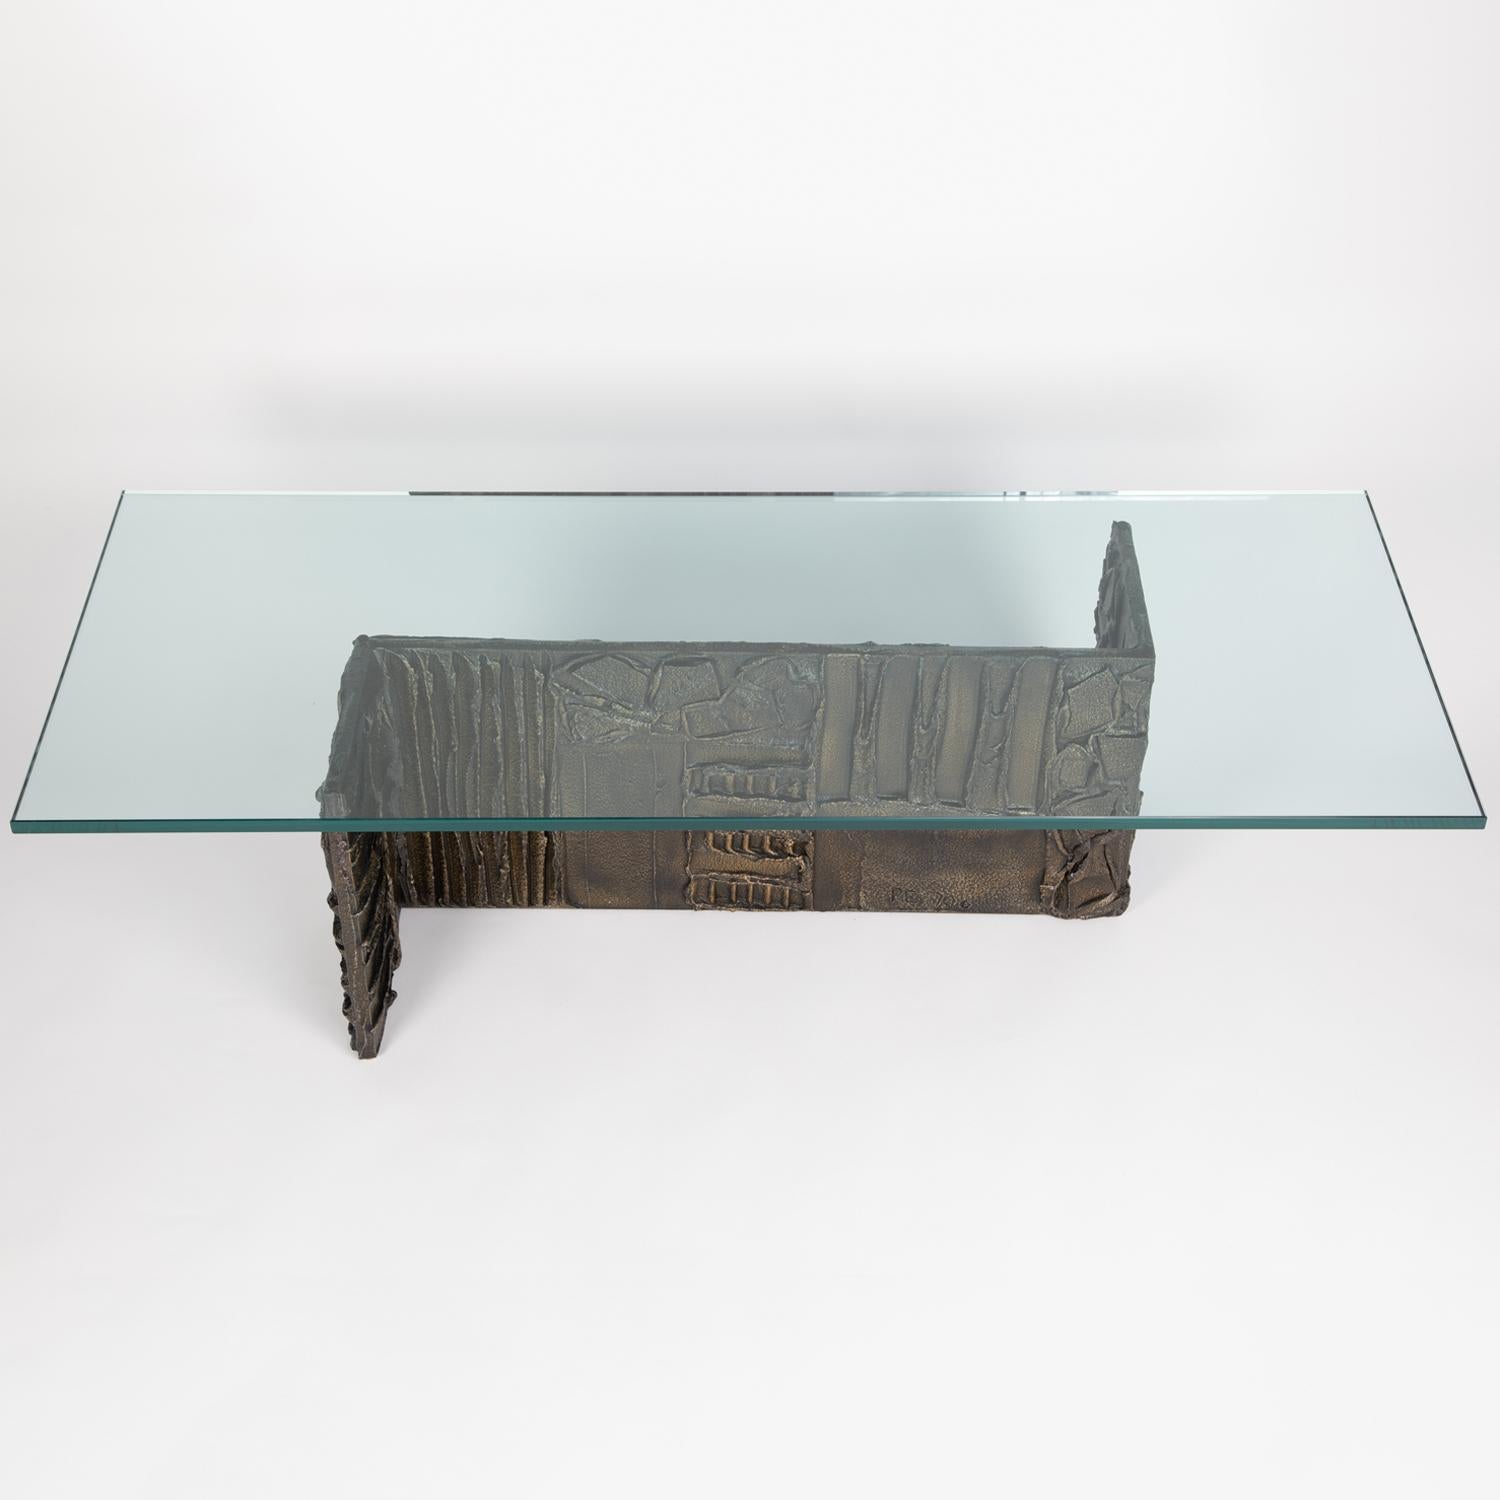 Rectangular coffee table, model PE 132 in sculpted bronze with glass top by Paul Evans for Directional Furniture, American 1970 (signed 